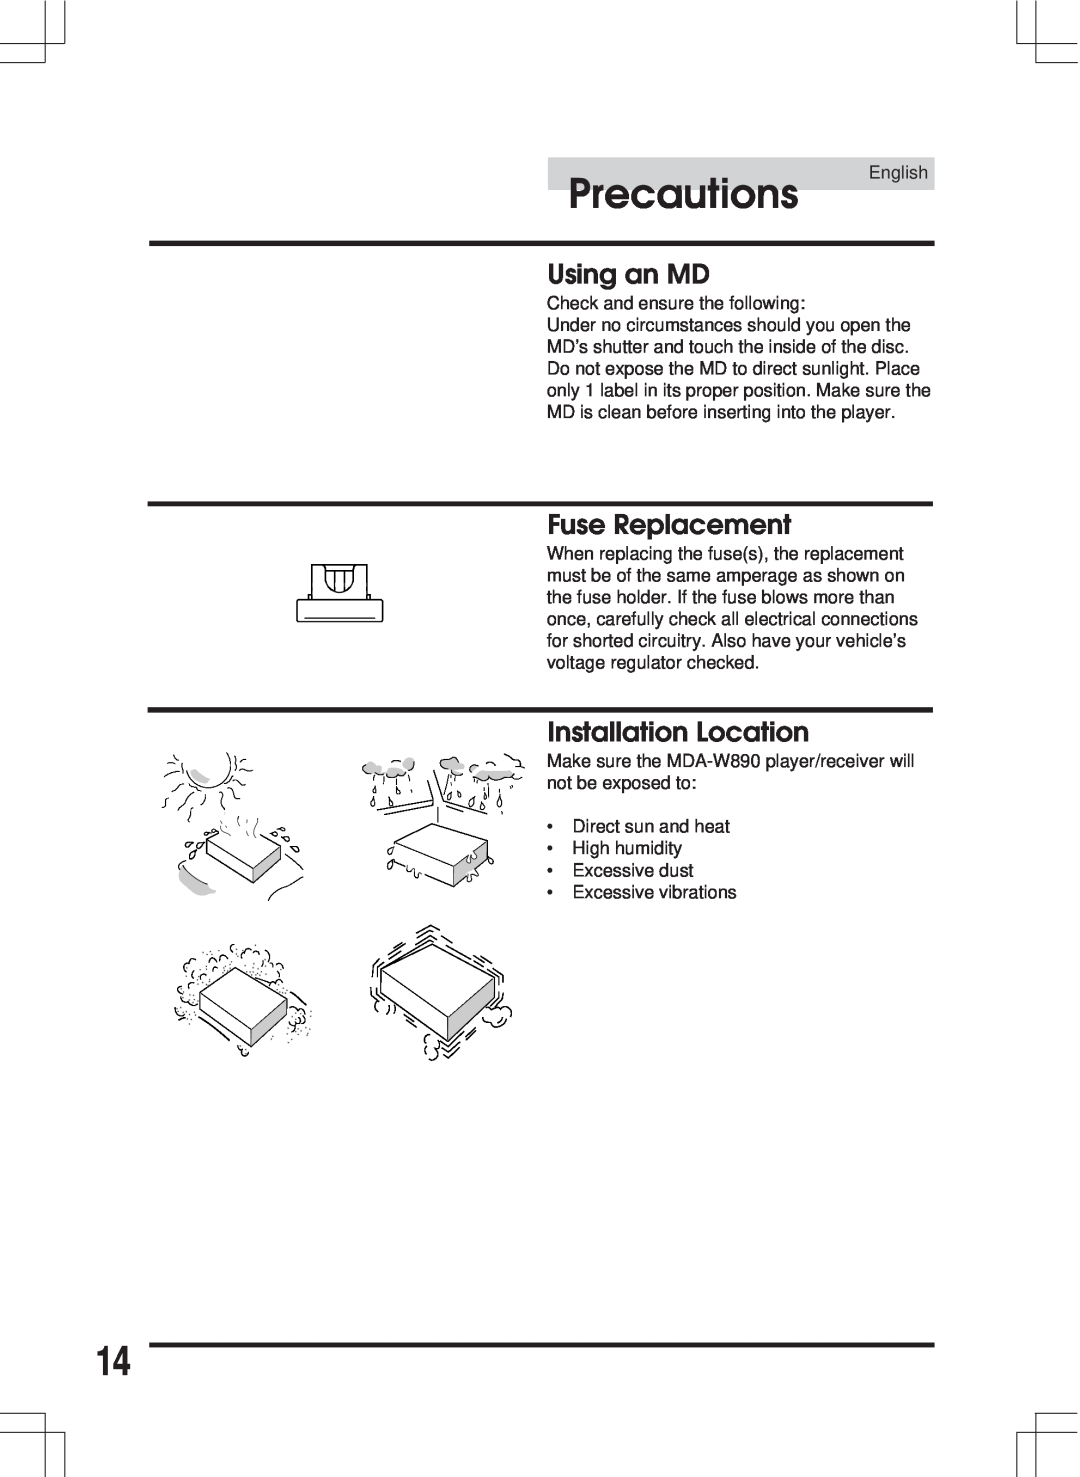 Alpine MDA-W890 owner manual Precautions, Using an MD, Fuse Replacement, Installation Location 